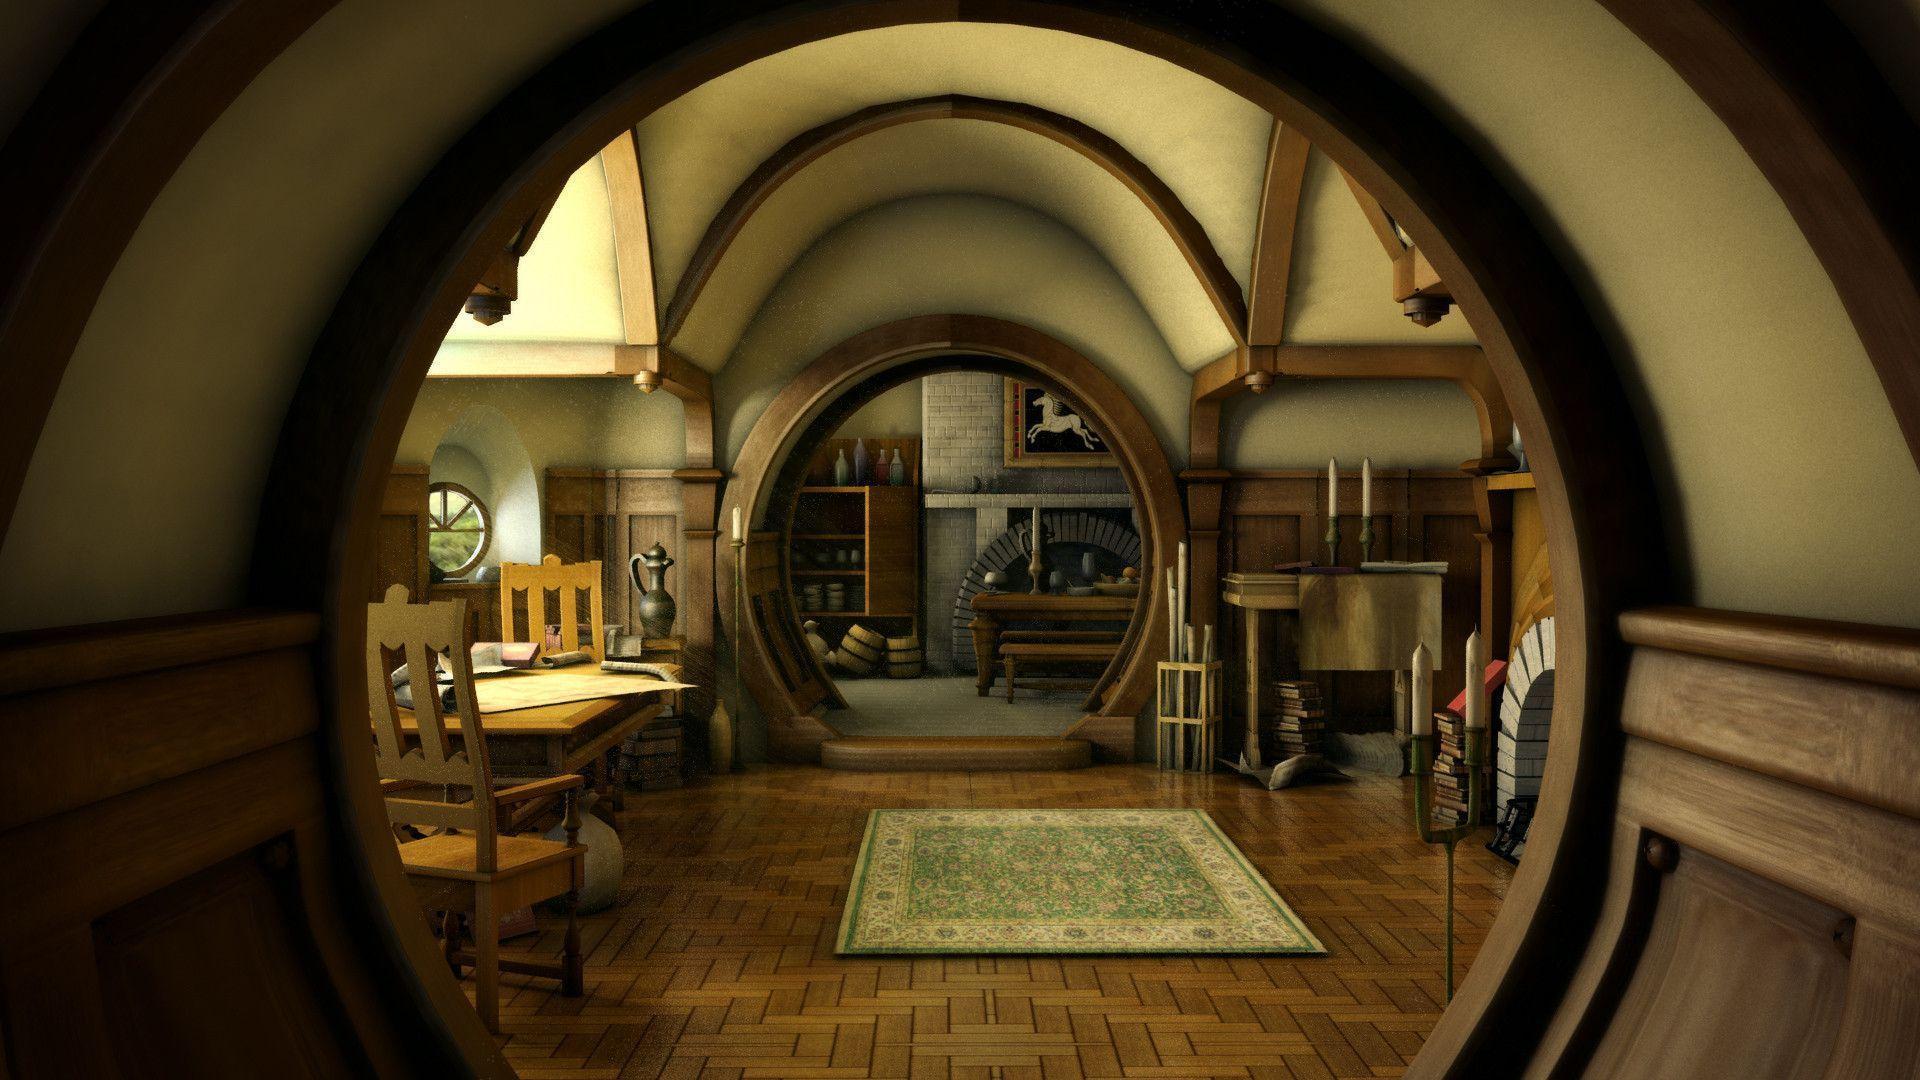 The Hobbit lord rings lotr architecture house room building